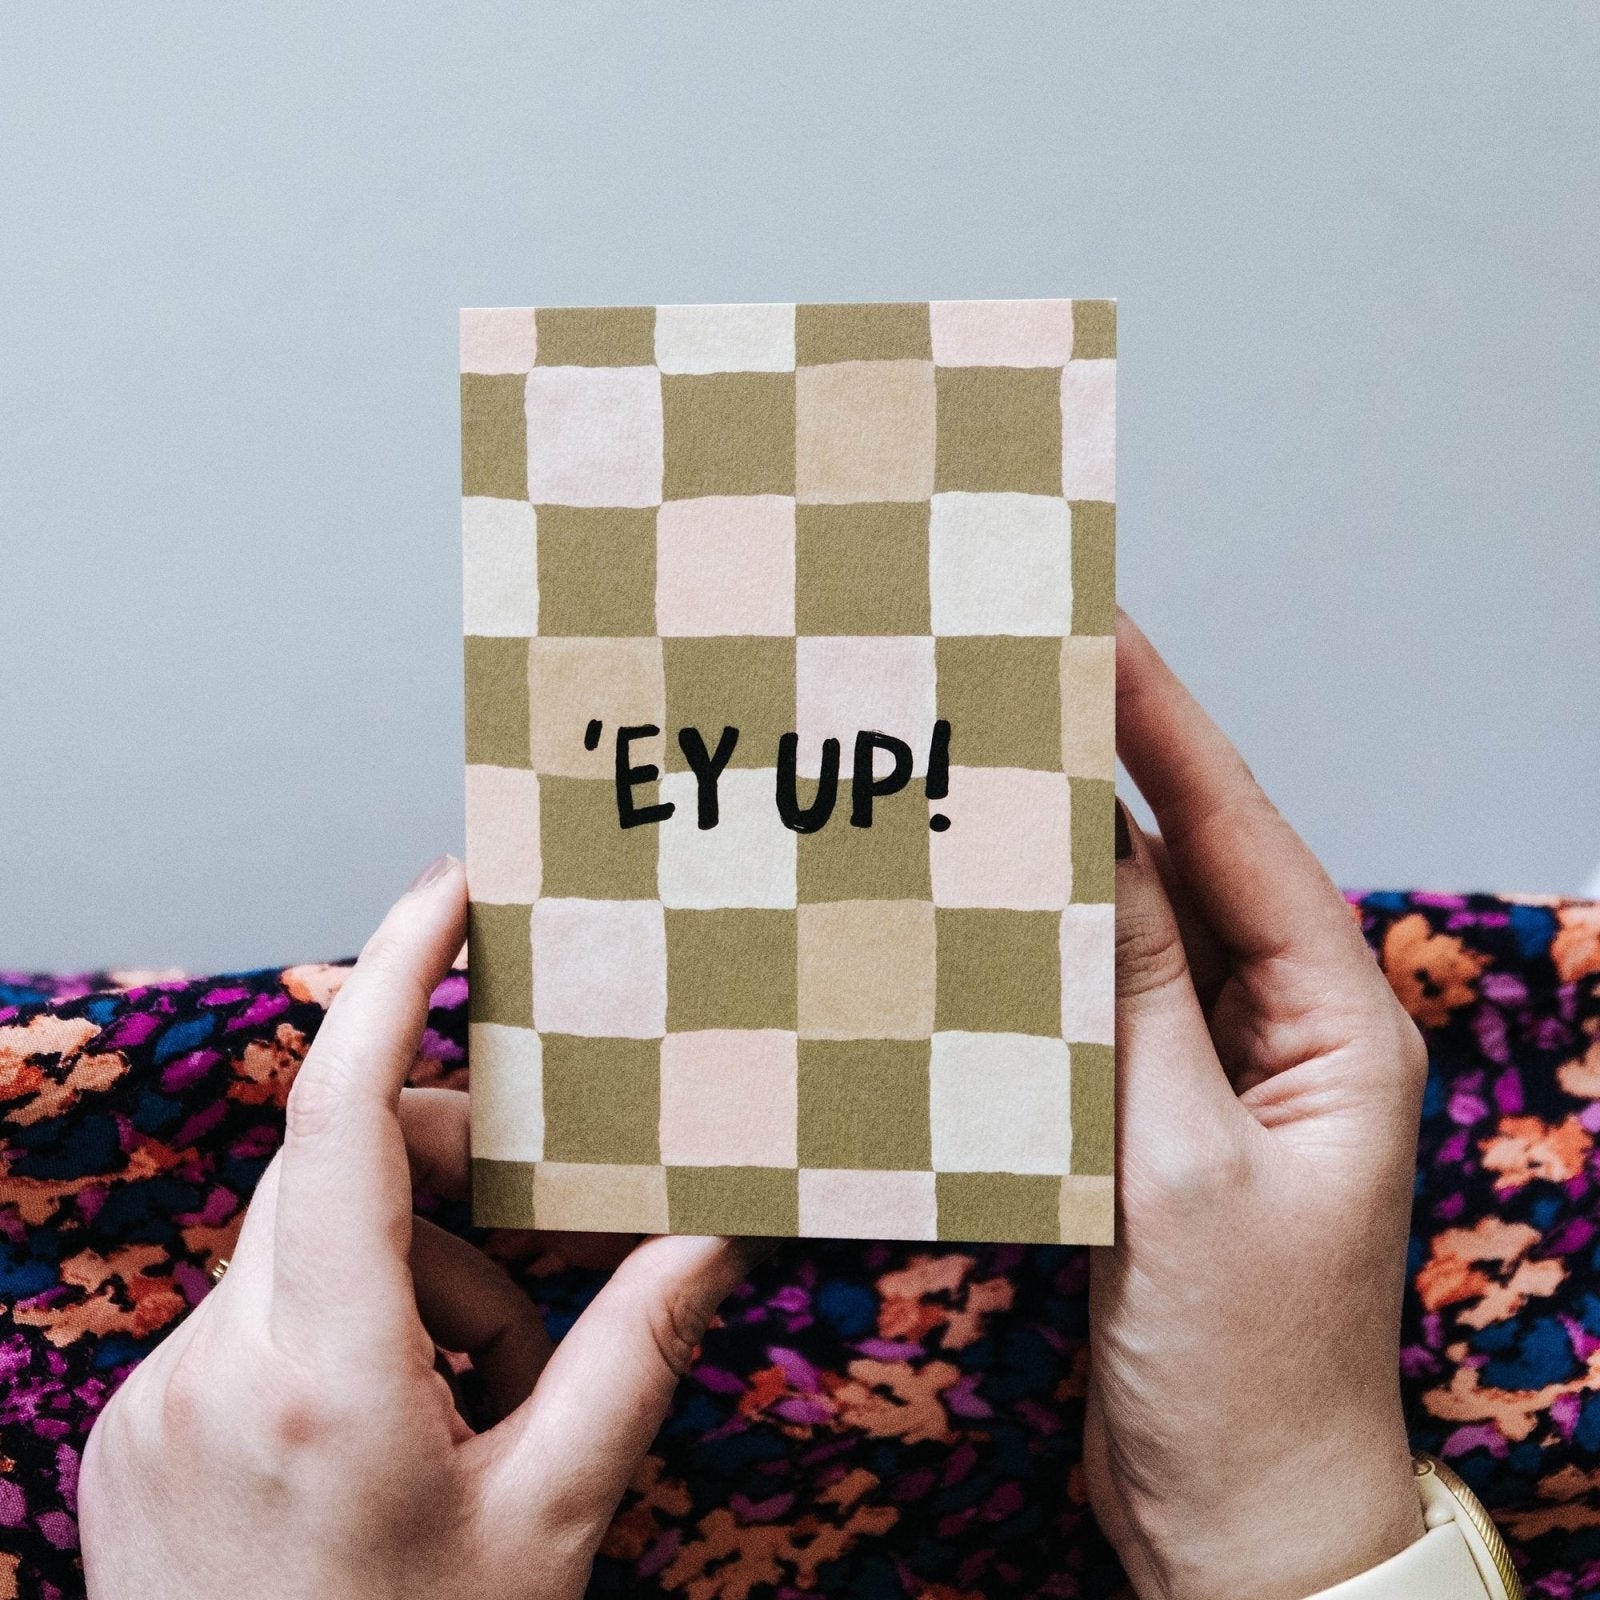 'Ey Up! Yorkshire Dialect Card - I am Nat Ltd - Greeting Card